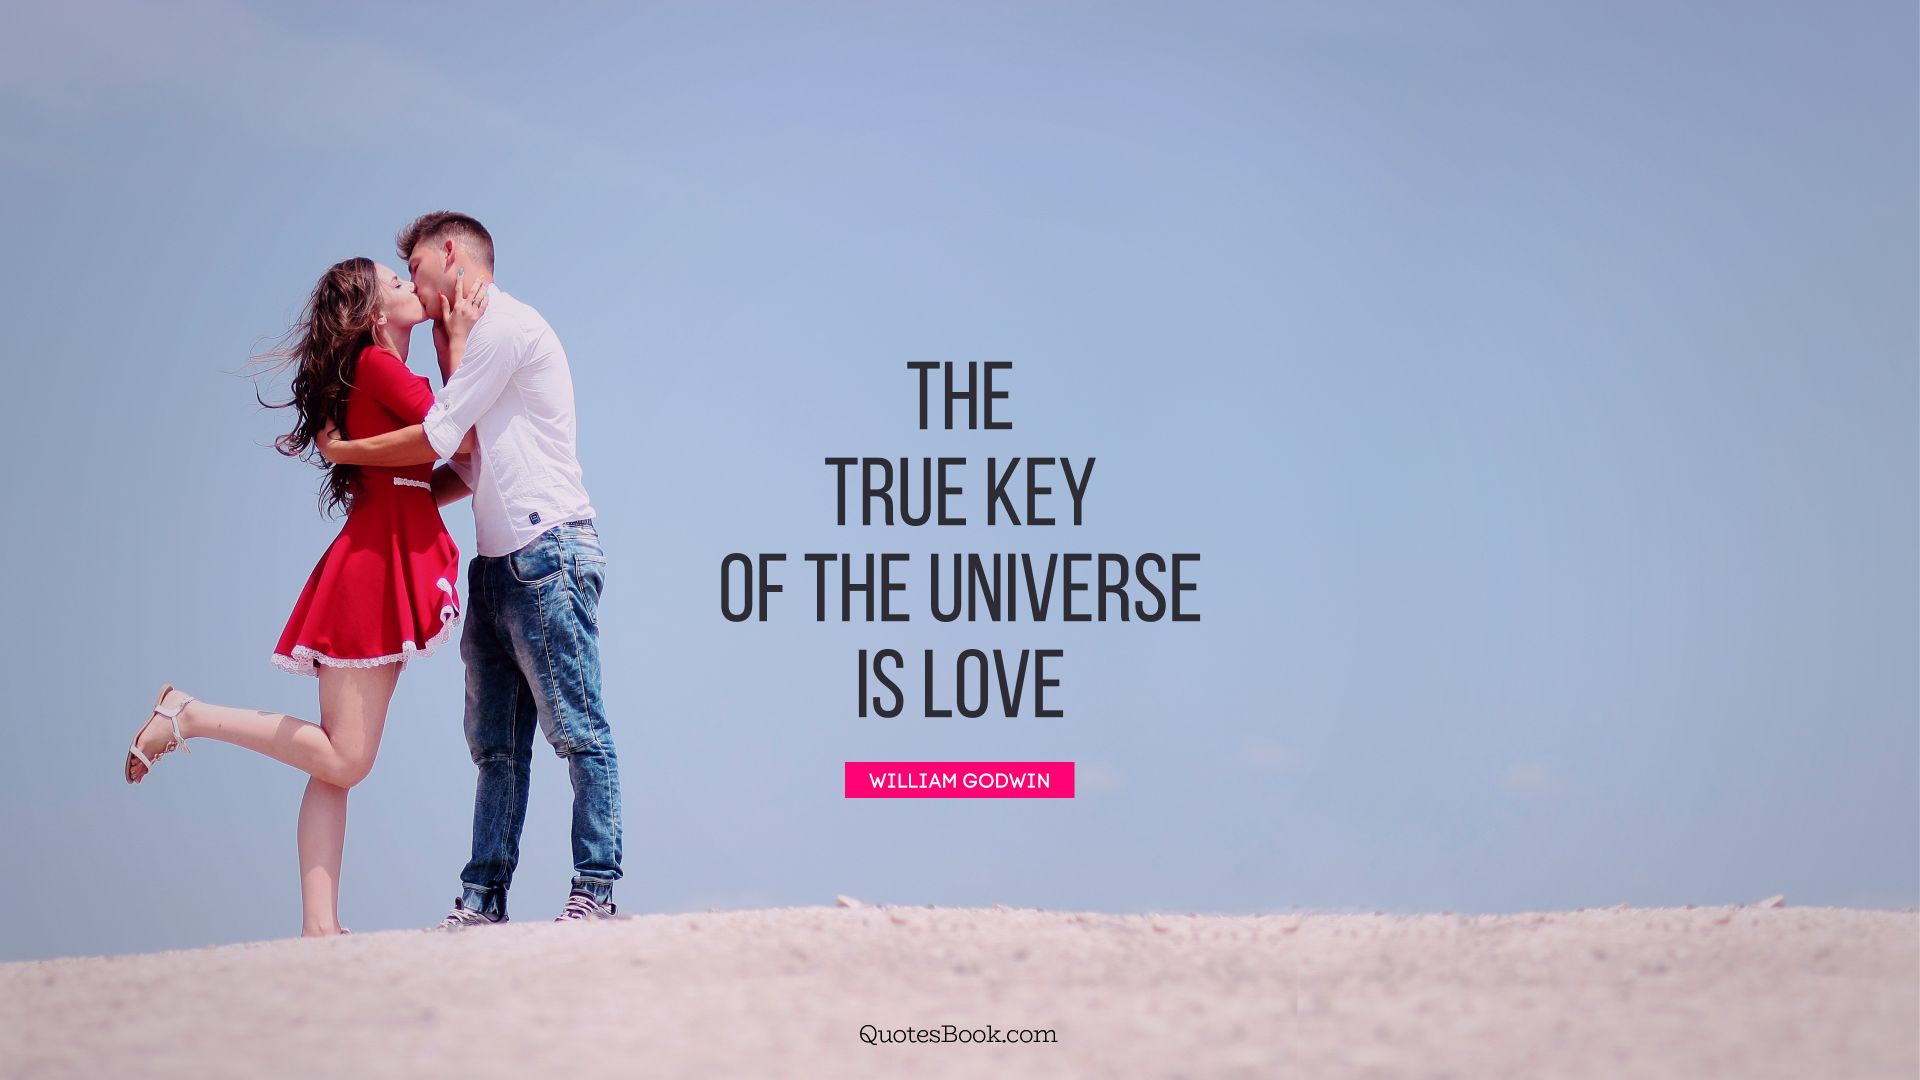 The true key of the universe is love. - Quote by William Godwin